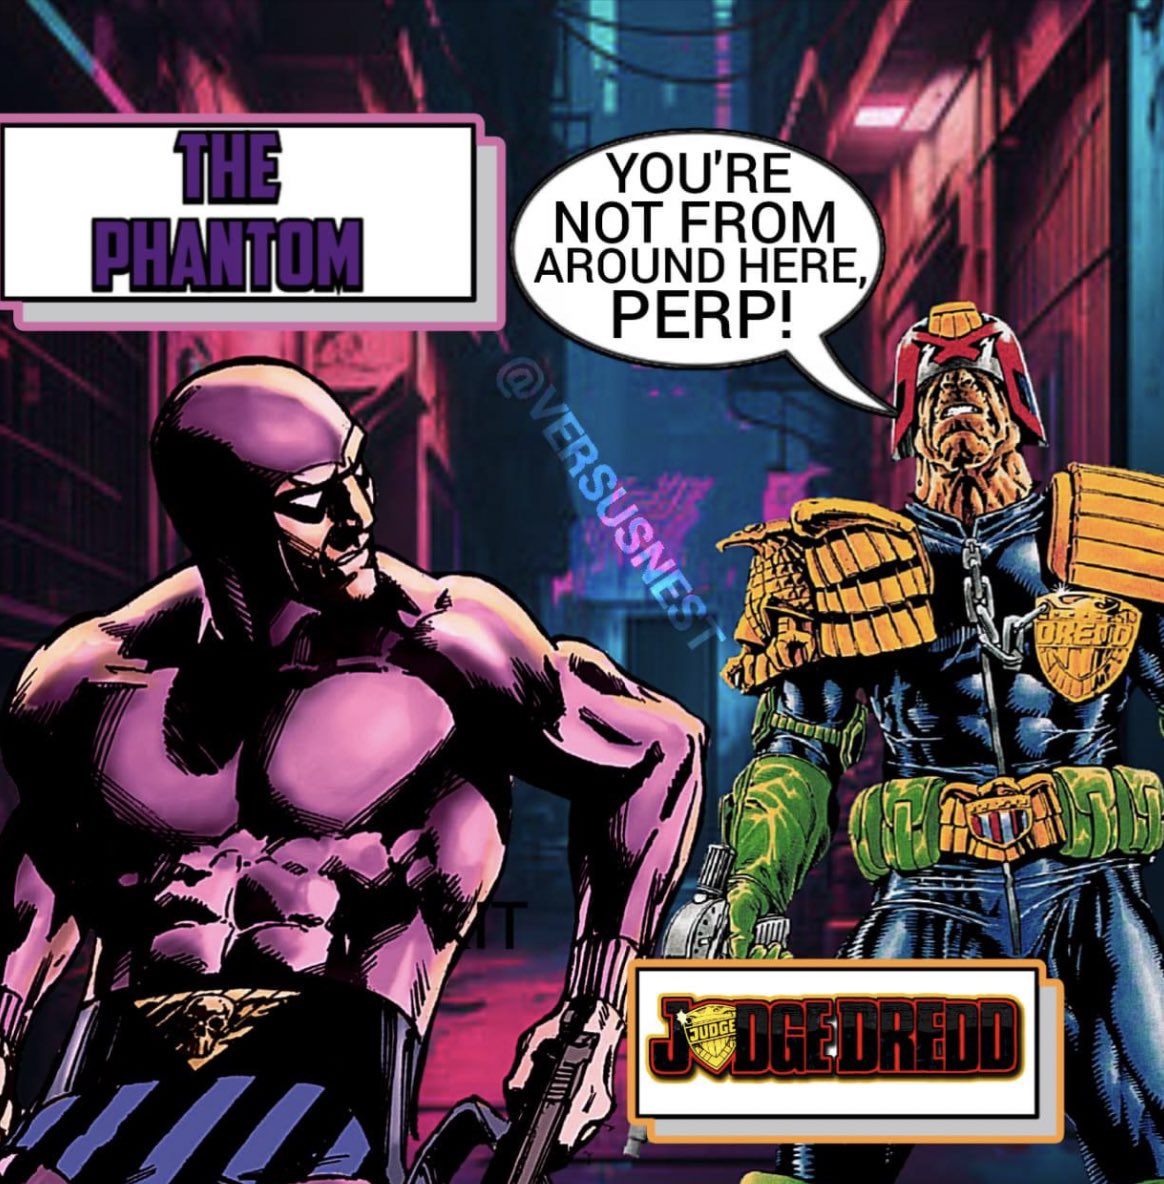 #ThePhantom👻 VS #JudgeDredd📱

(DC VS IDW)

Who wins, and why⁉️

#whowouldwin #deathbattle #SHPOLL24